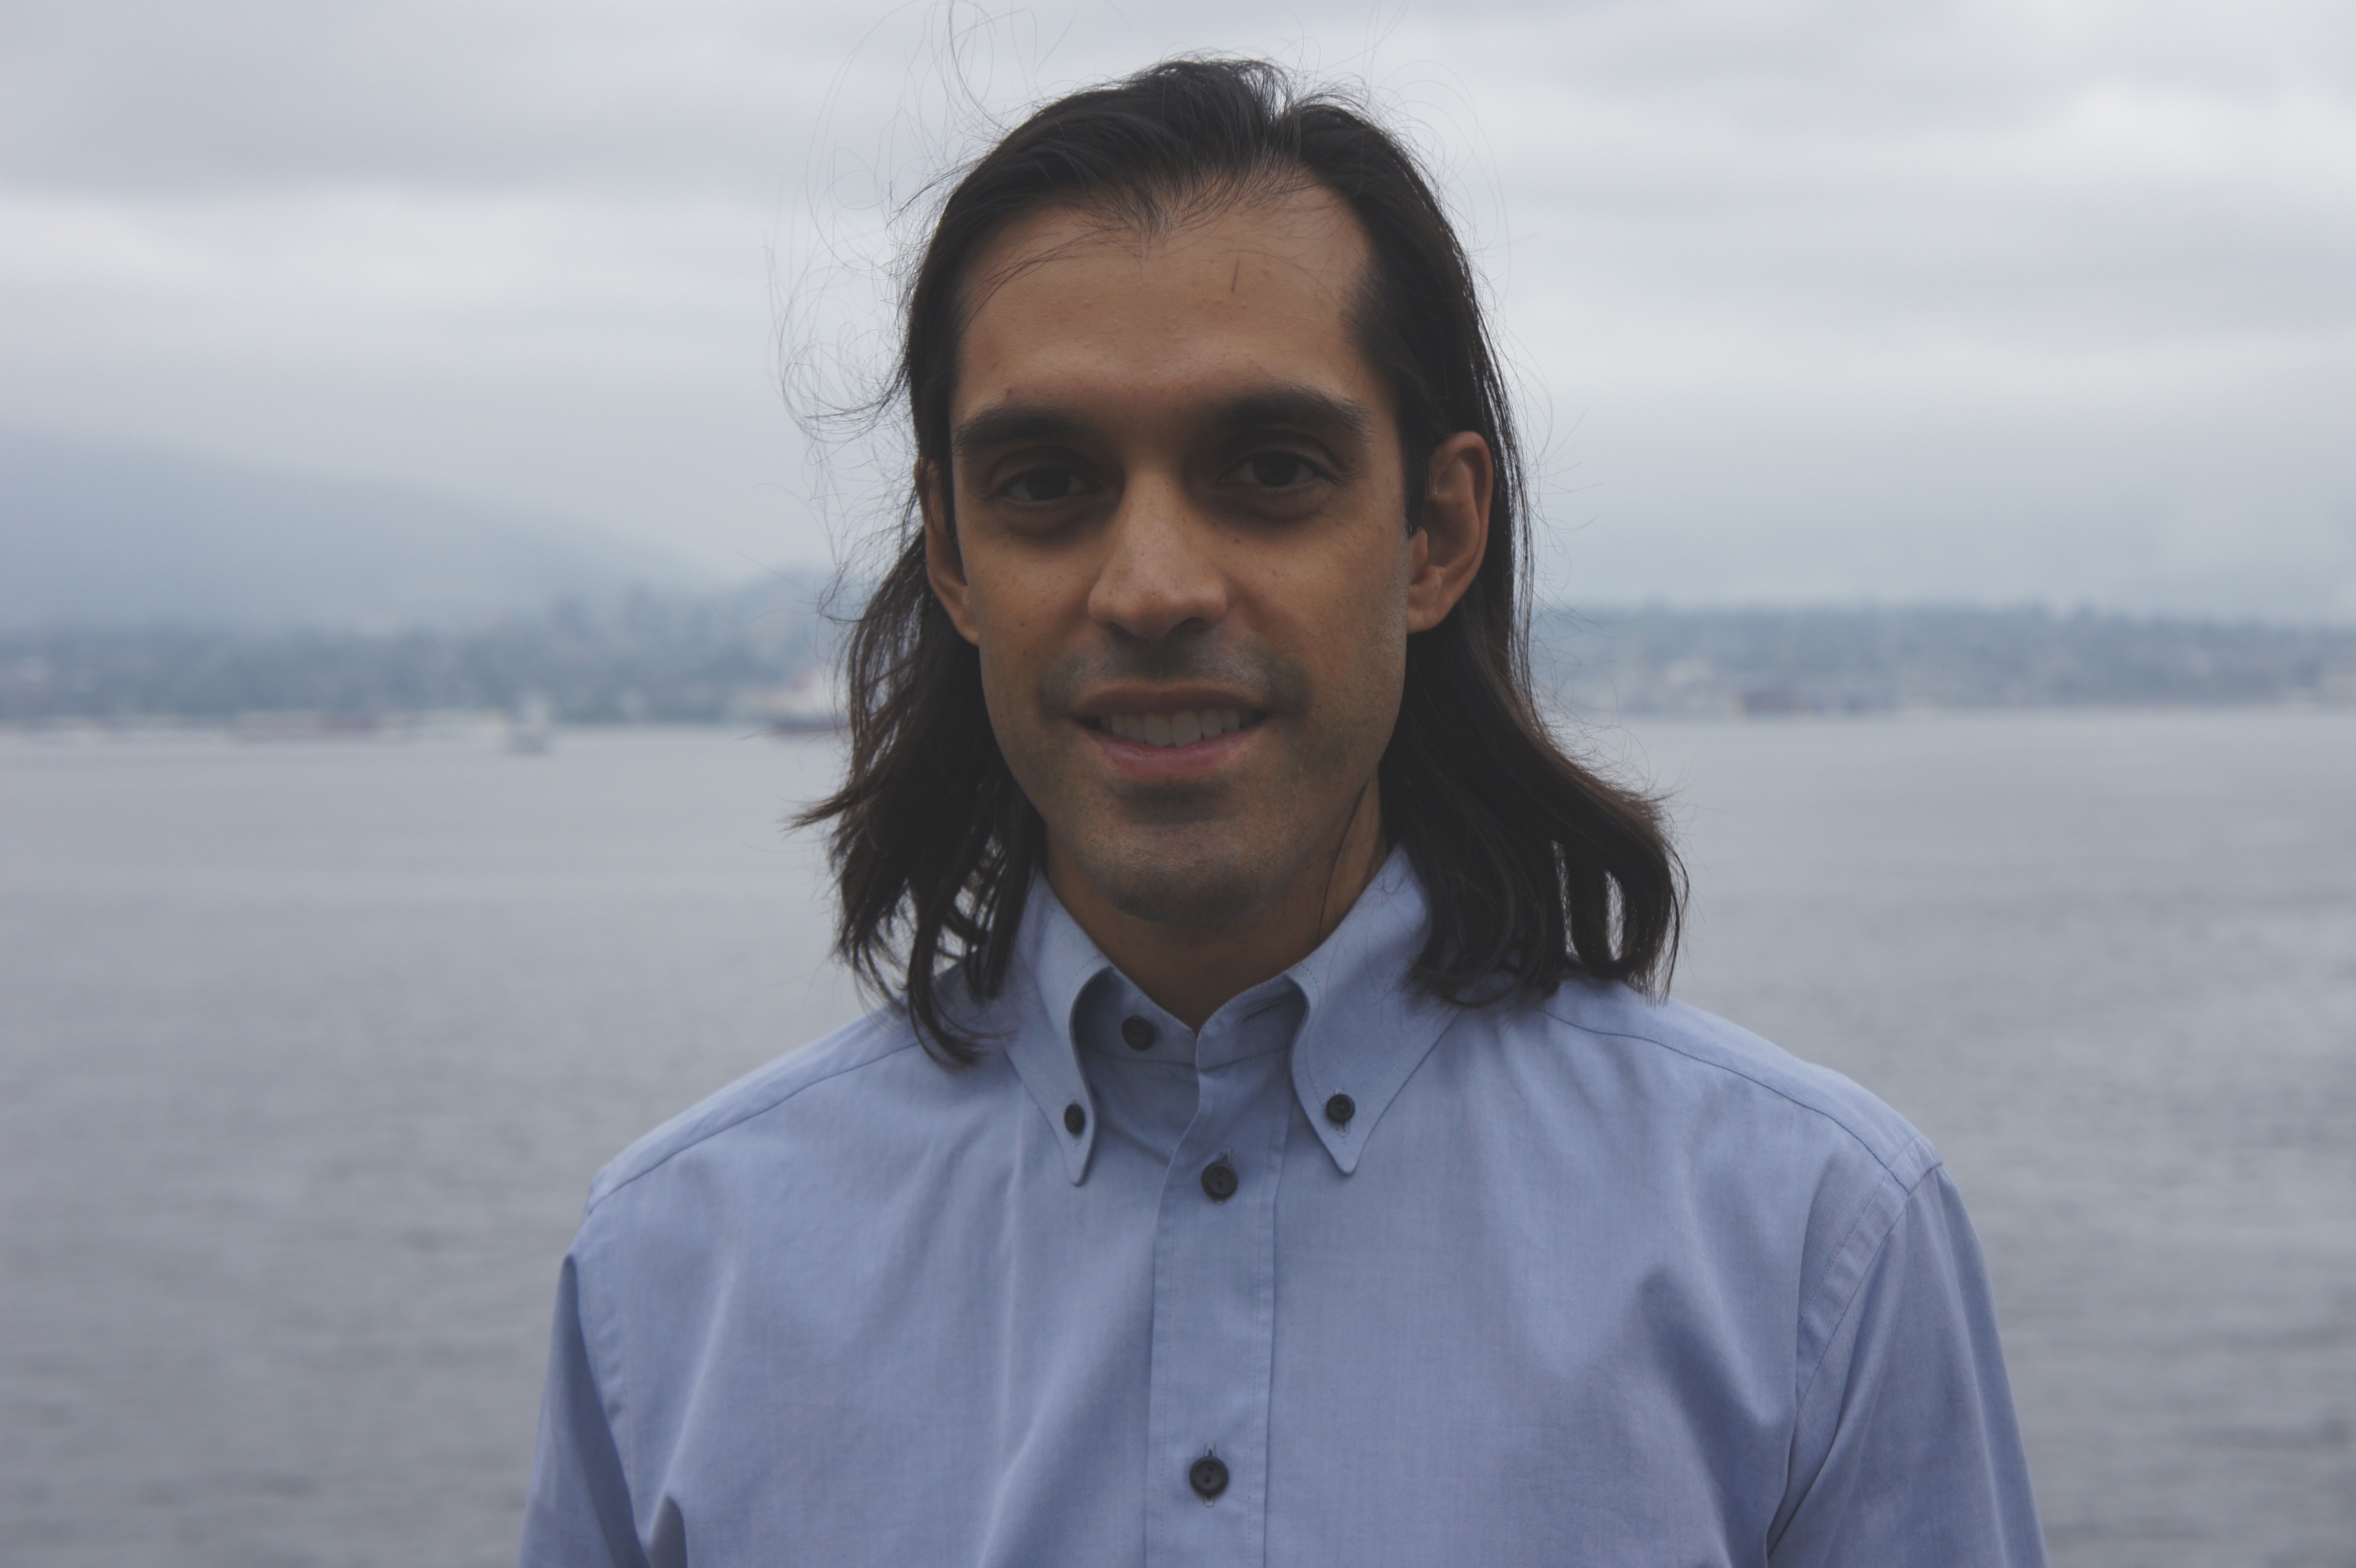 Noah is a 33-year old man with shoulder-length, dark brown hair and is wearing a blue button-down shirt. The Pacific Ocean is in the background.